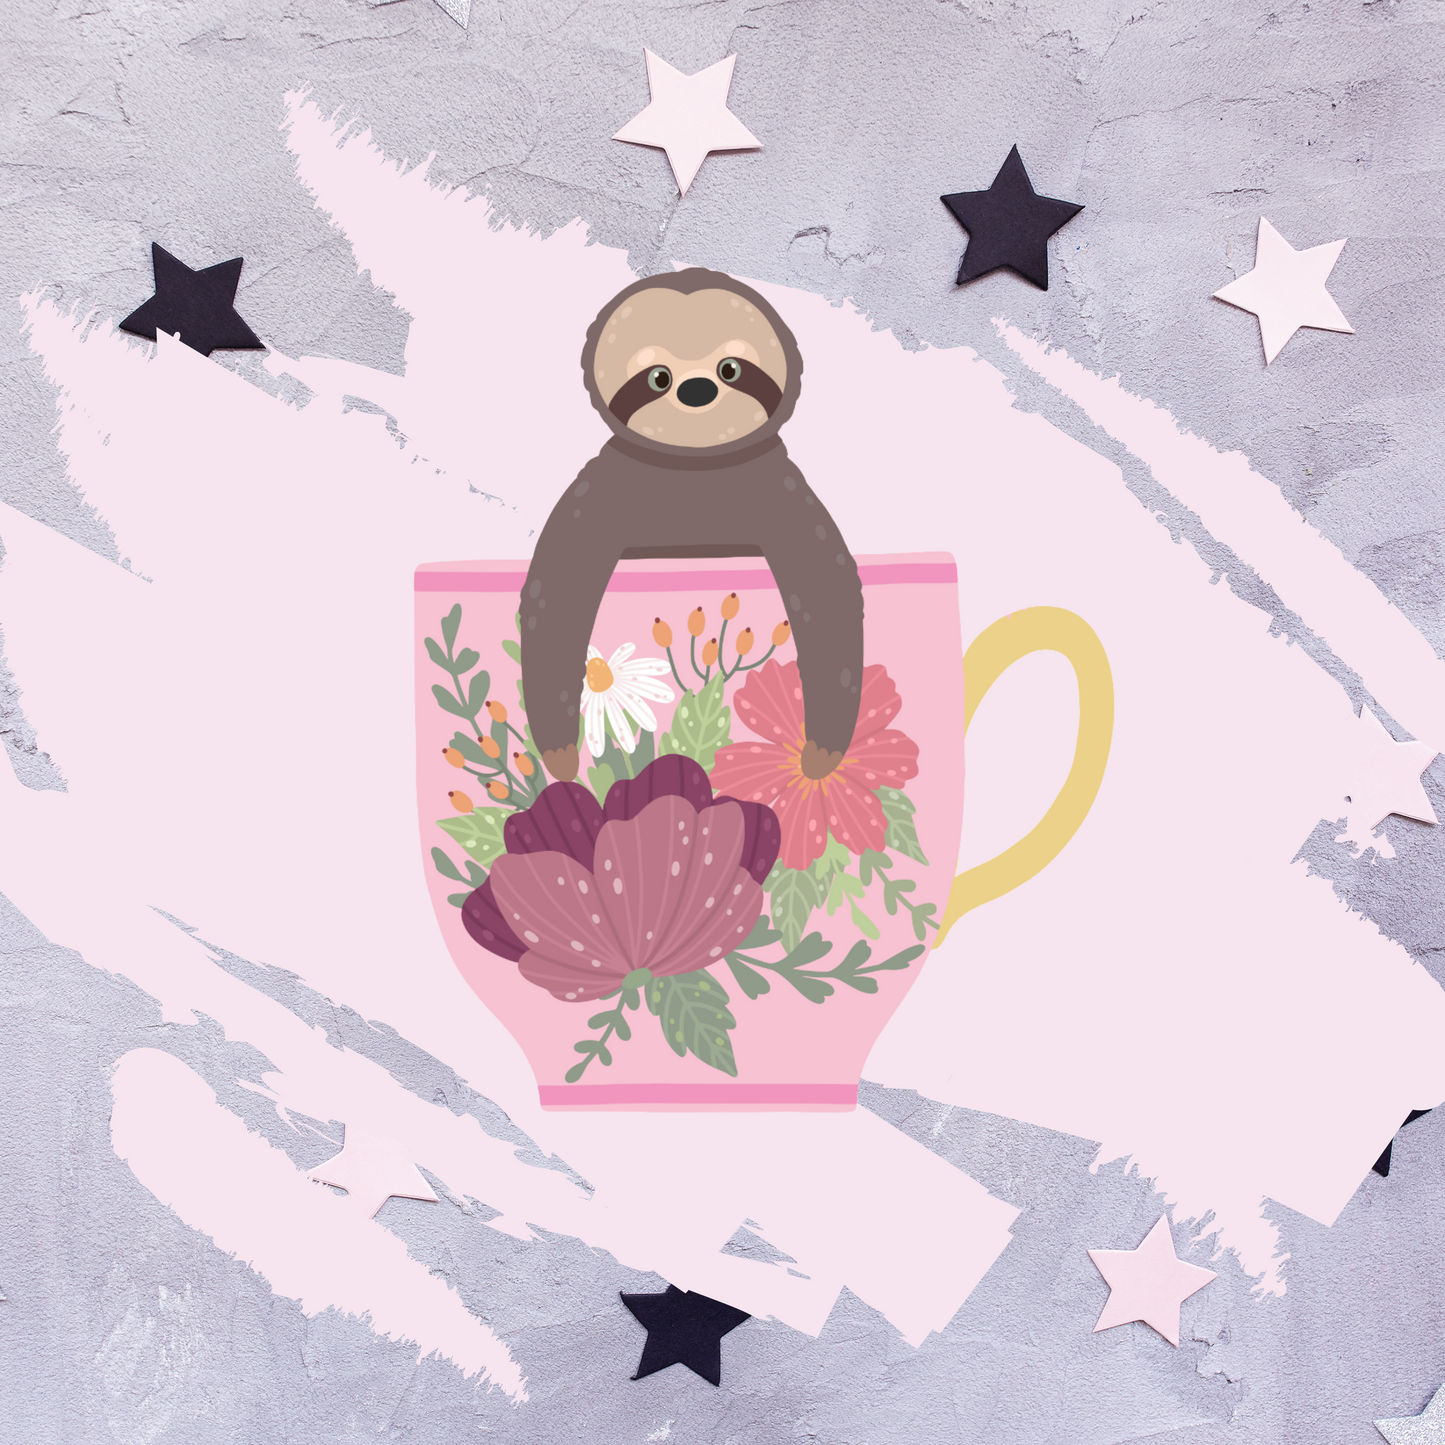 Teacup Stickers, Tea Stickers, Sloth Stickers, Floral Stickers, Planner Stickers, Vintage Floral, Cup Stickers